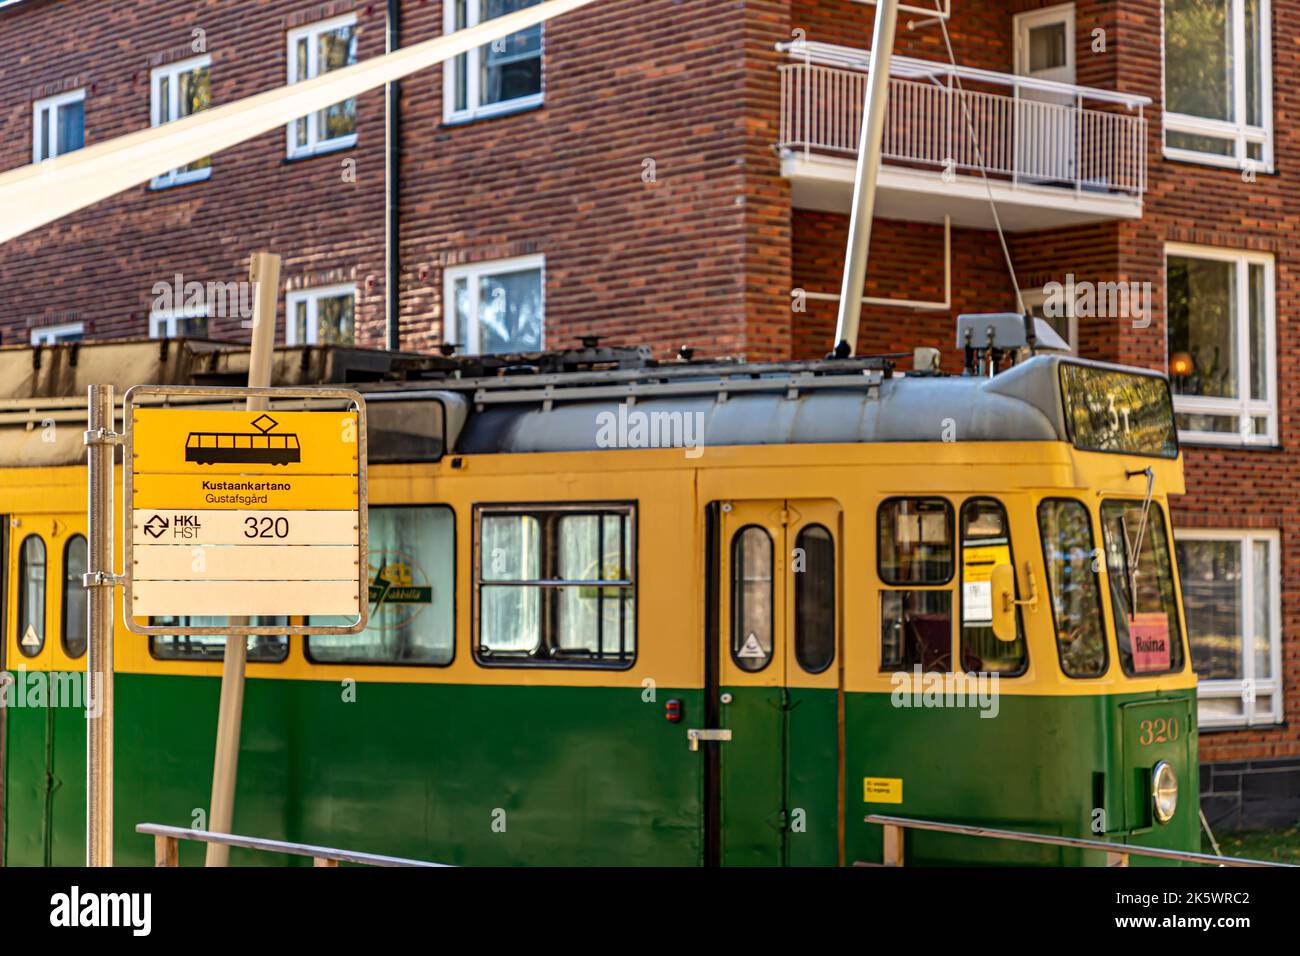 Decommissioned HKL motor tram 320 with '3T' headsign, parked in front of Kustaankartano senior centre building B in Oulunkylä, Helsinki, Finland. Stock Photo